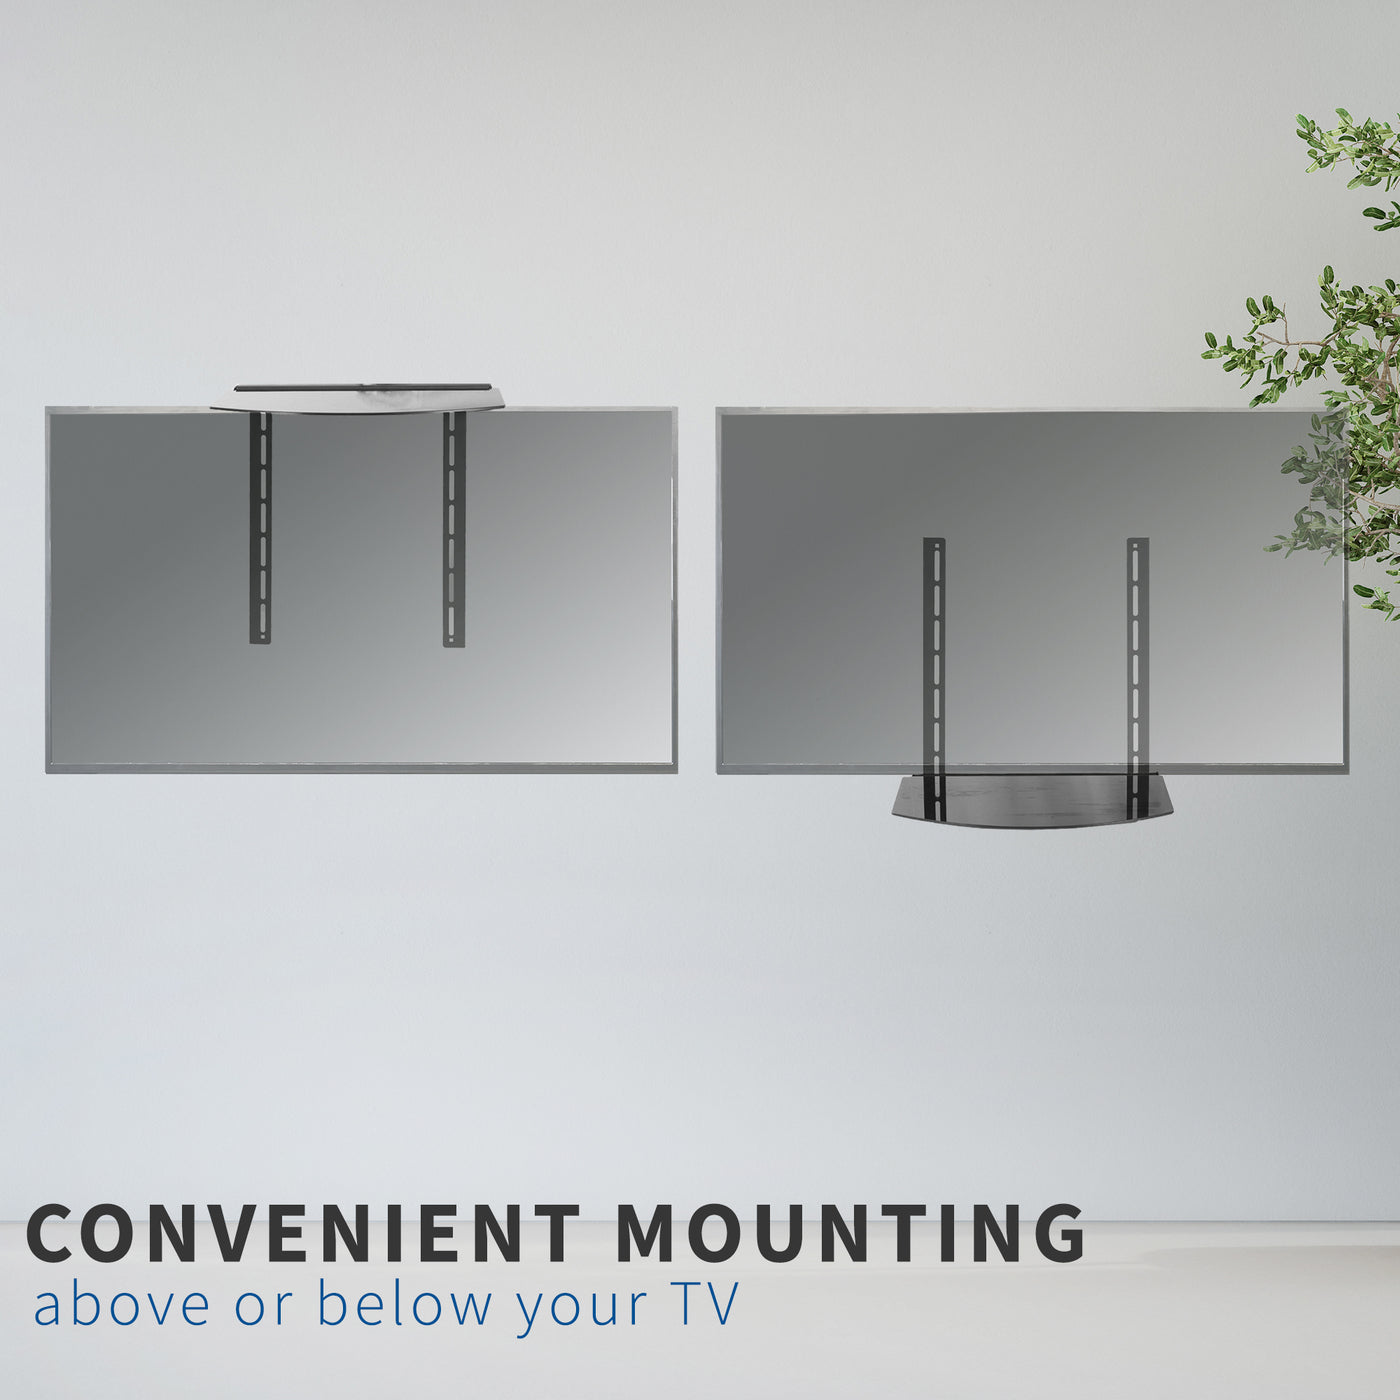 This versatile shelf is convenient for overhead mounting or under mounting.